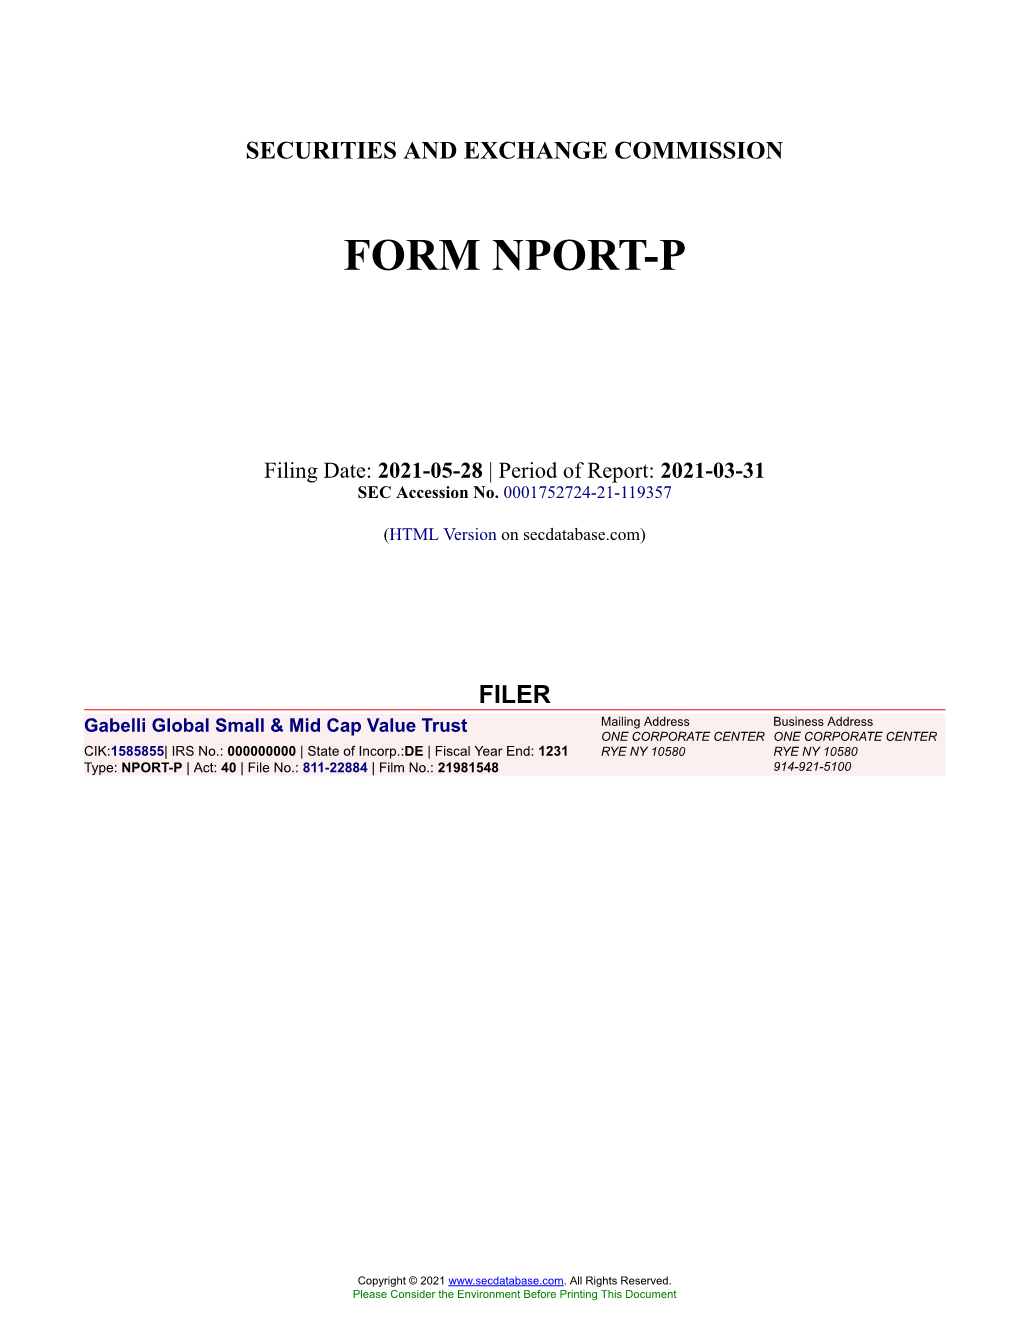 Gabelli Global Small & Mid Cap Value Trust Form NPORT-P Filed 2021